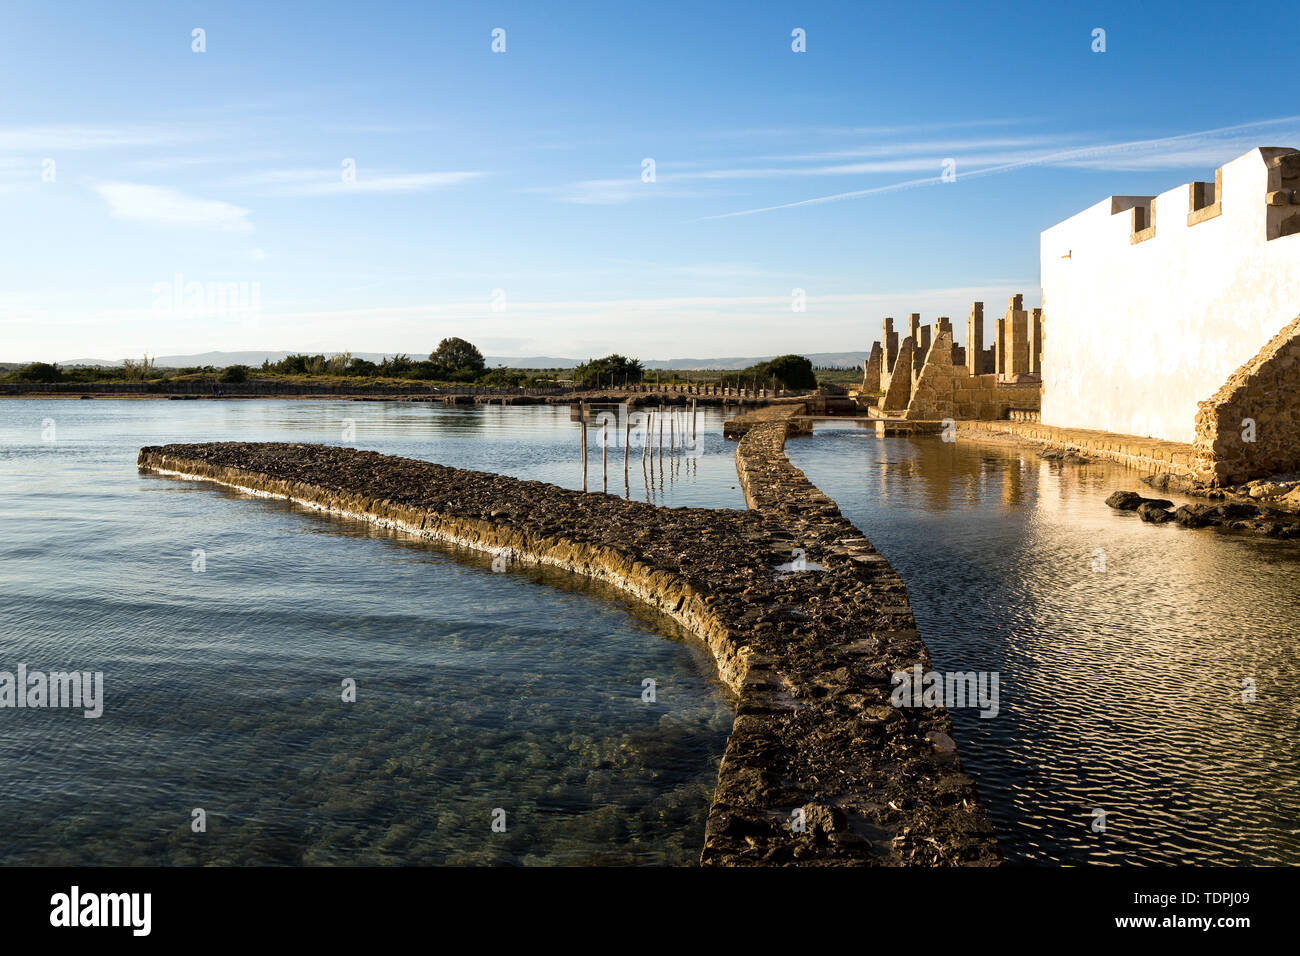 Landscapes of the Beach of Vendicari Nature Reserve in Sicily, Italy. Stock Photo